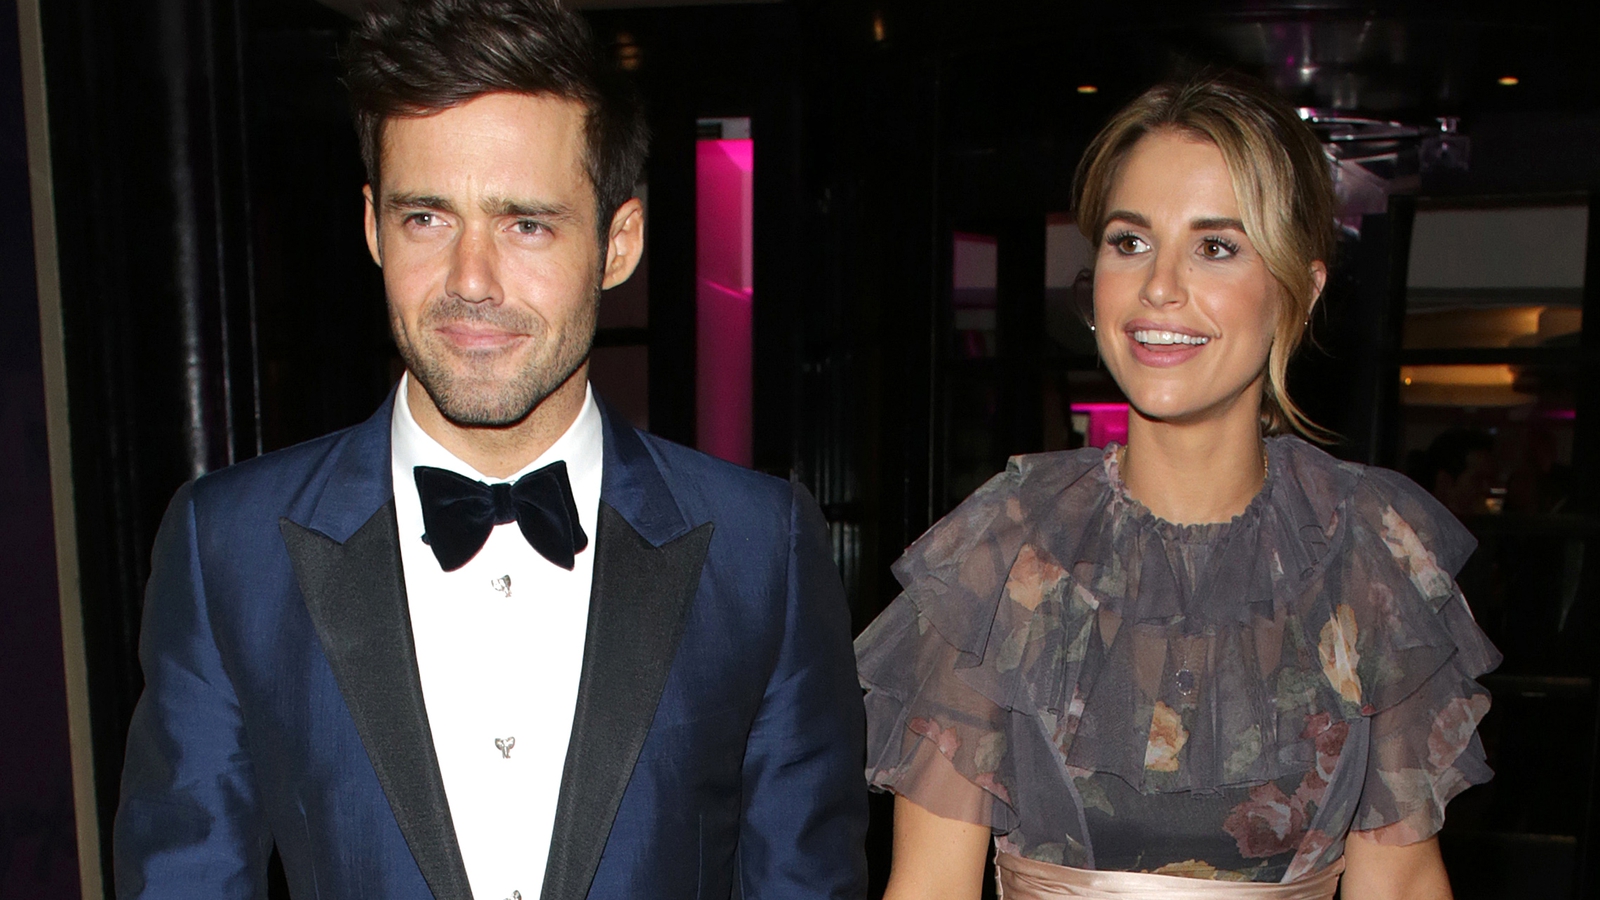 Spencer Matthews And Vogue Williams : Vogue Williams And Spencer Matthews Announce Daughter S Birth : Los angeles — spencer matthews and vogue williams gave a playful insight into their marriage as they swapped jibes on monday night's episode of their e4 reality show.